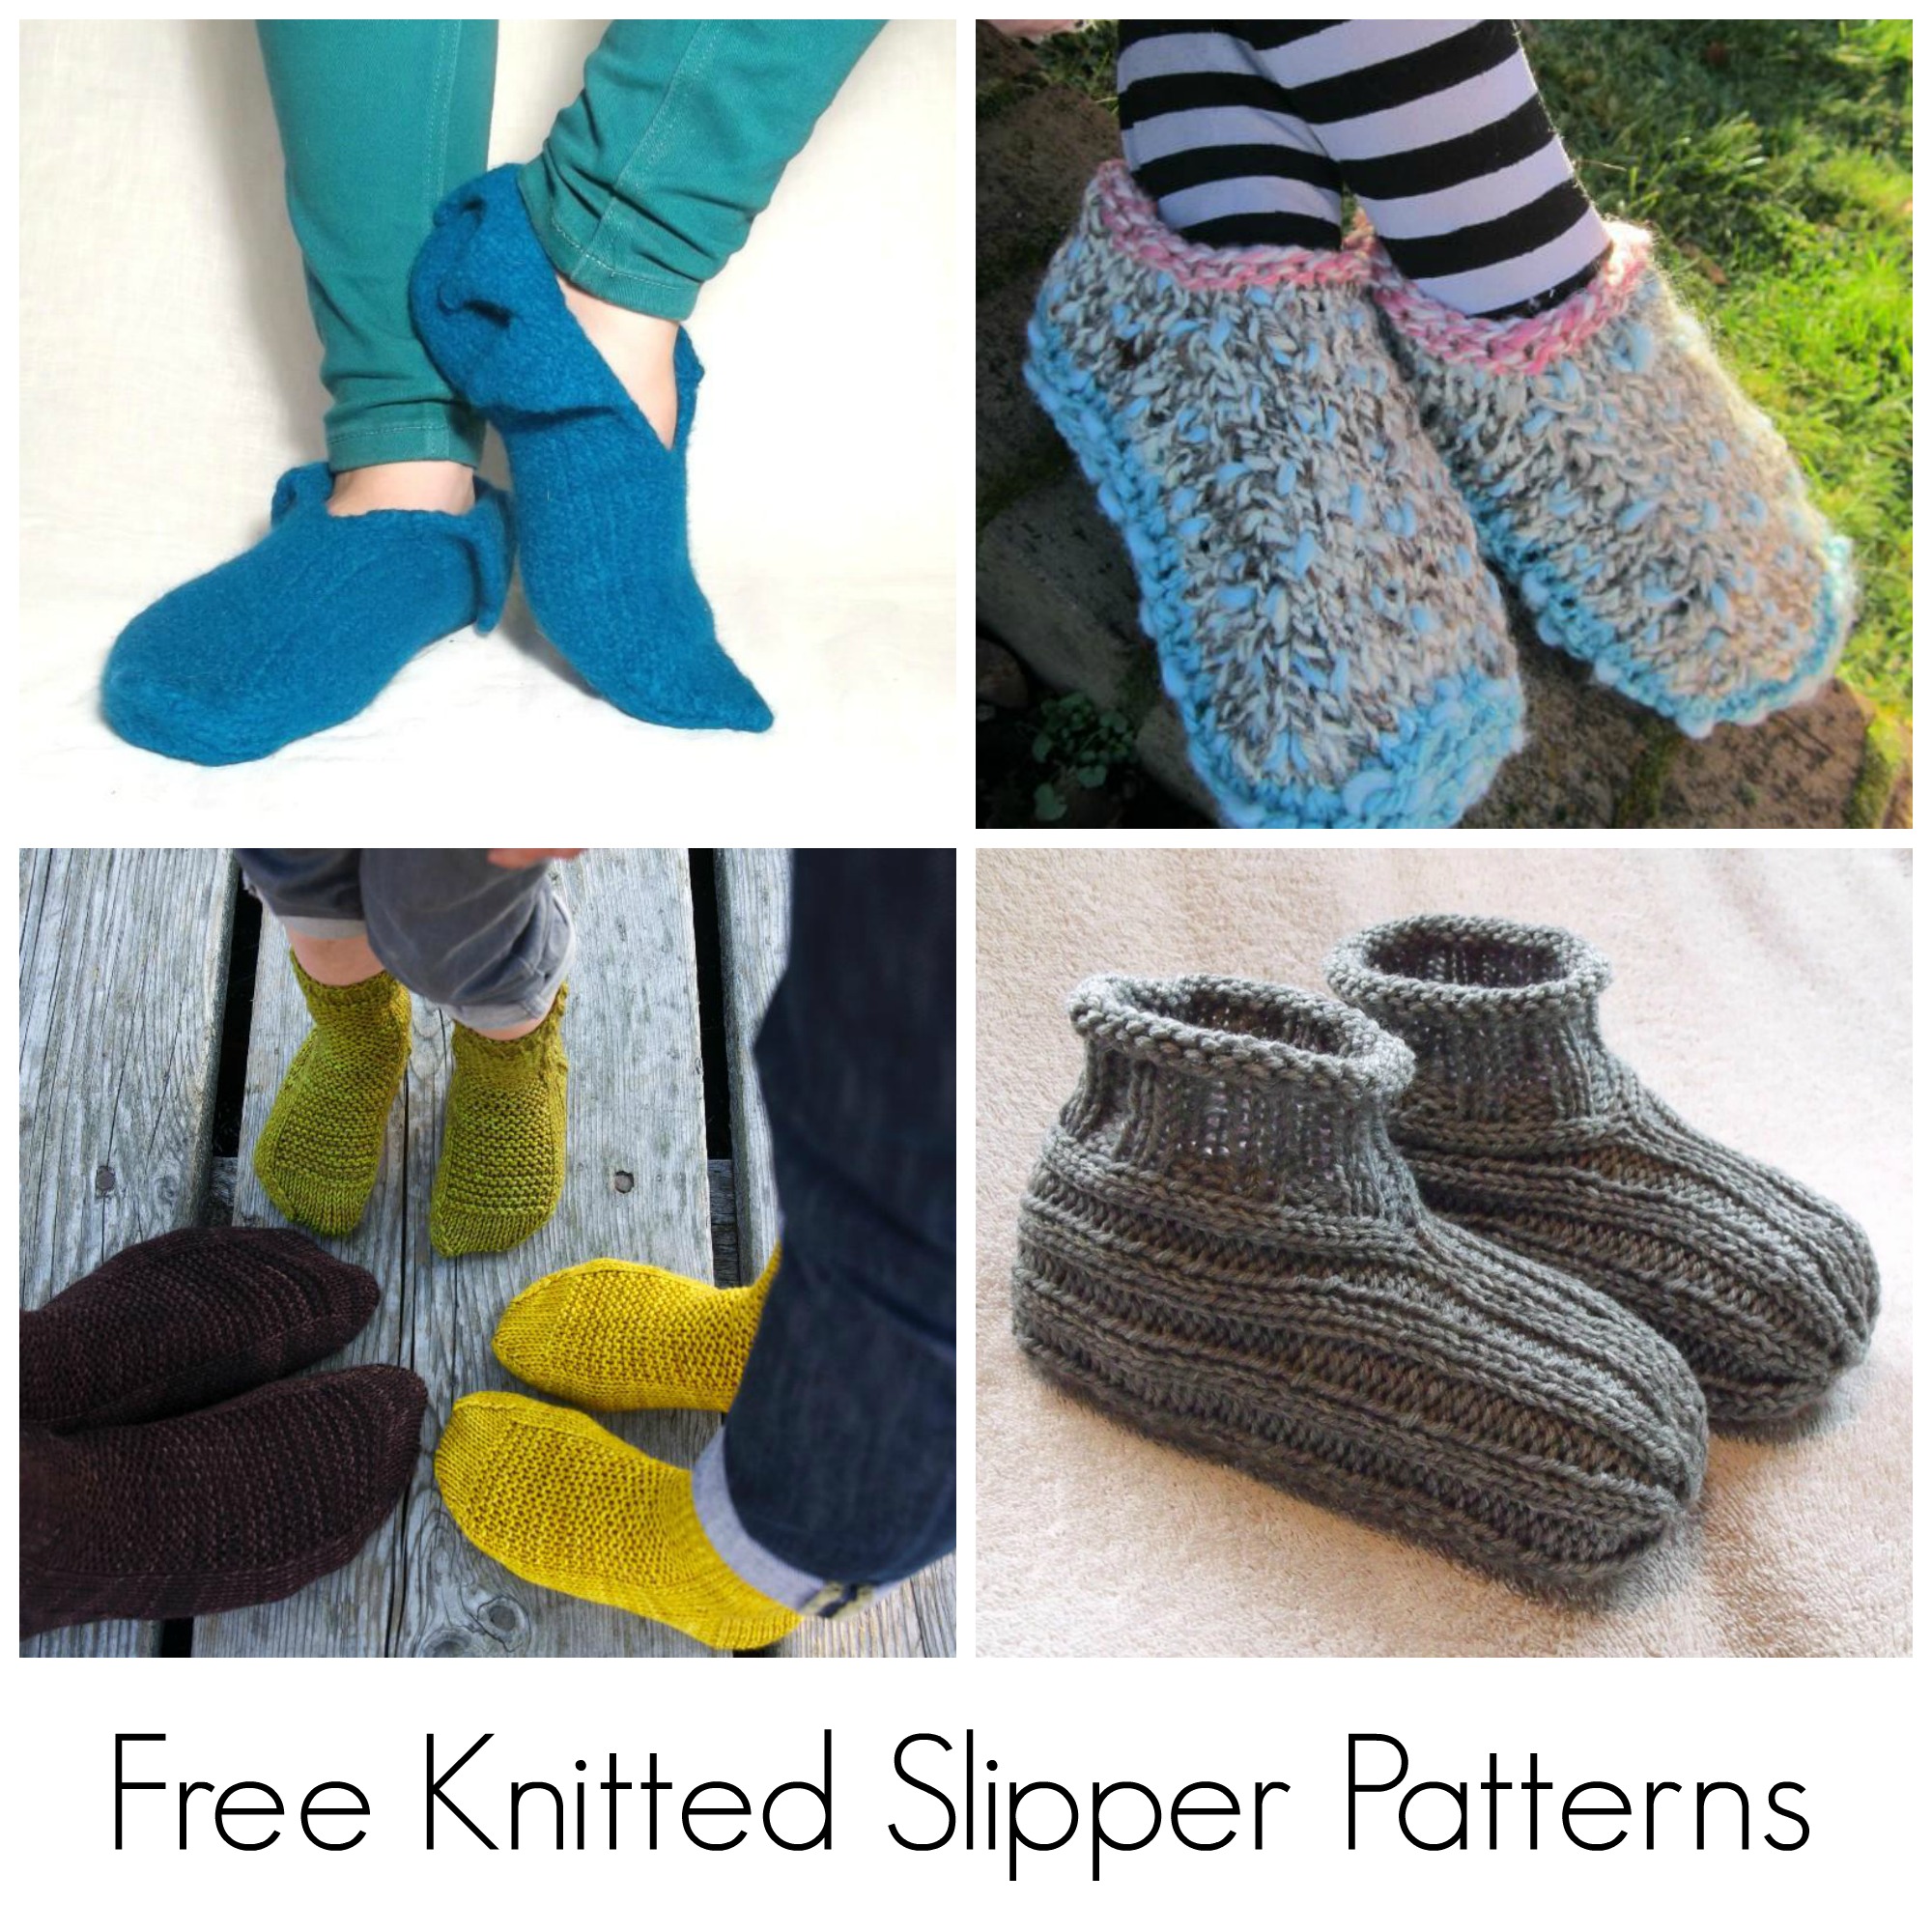 Free Knitted Slipper Patterns